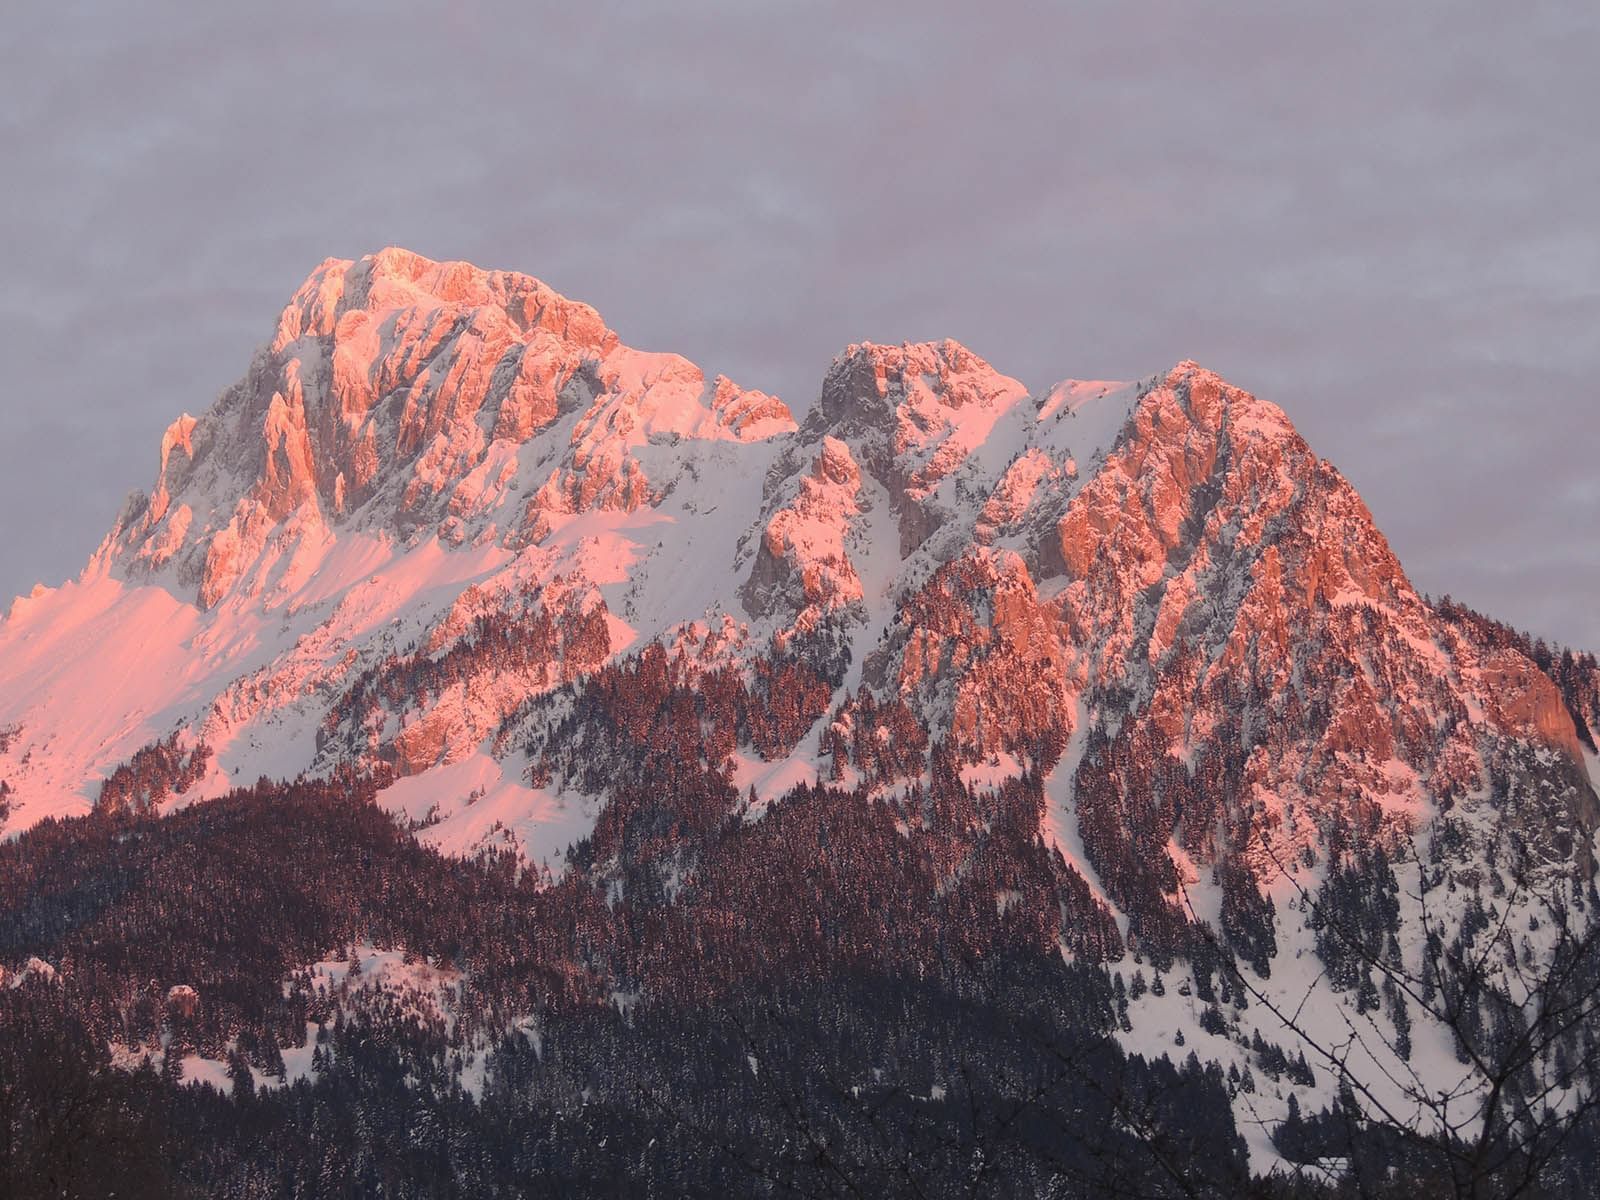 Sunset Light Reflected on Snowy Mountains near Hotel Les Gentian